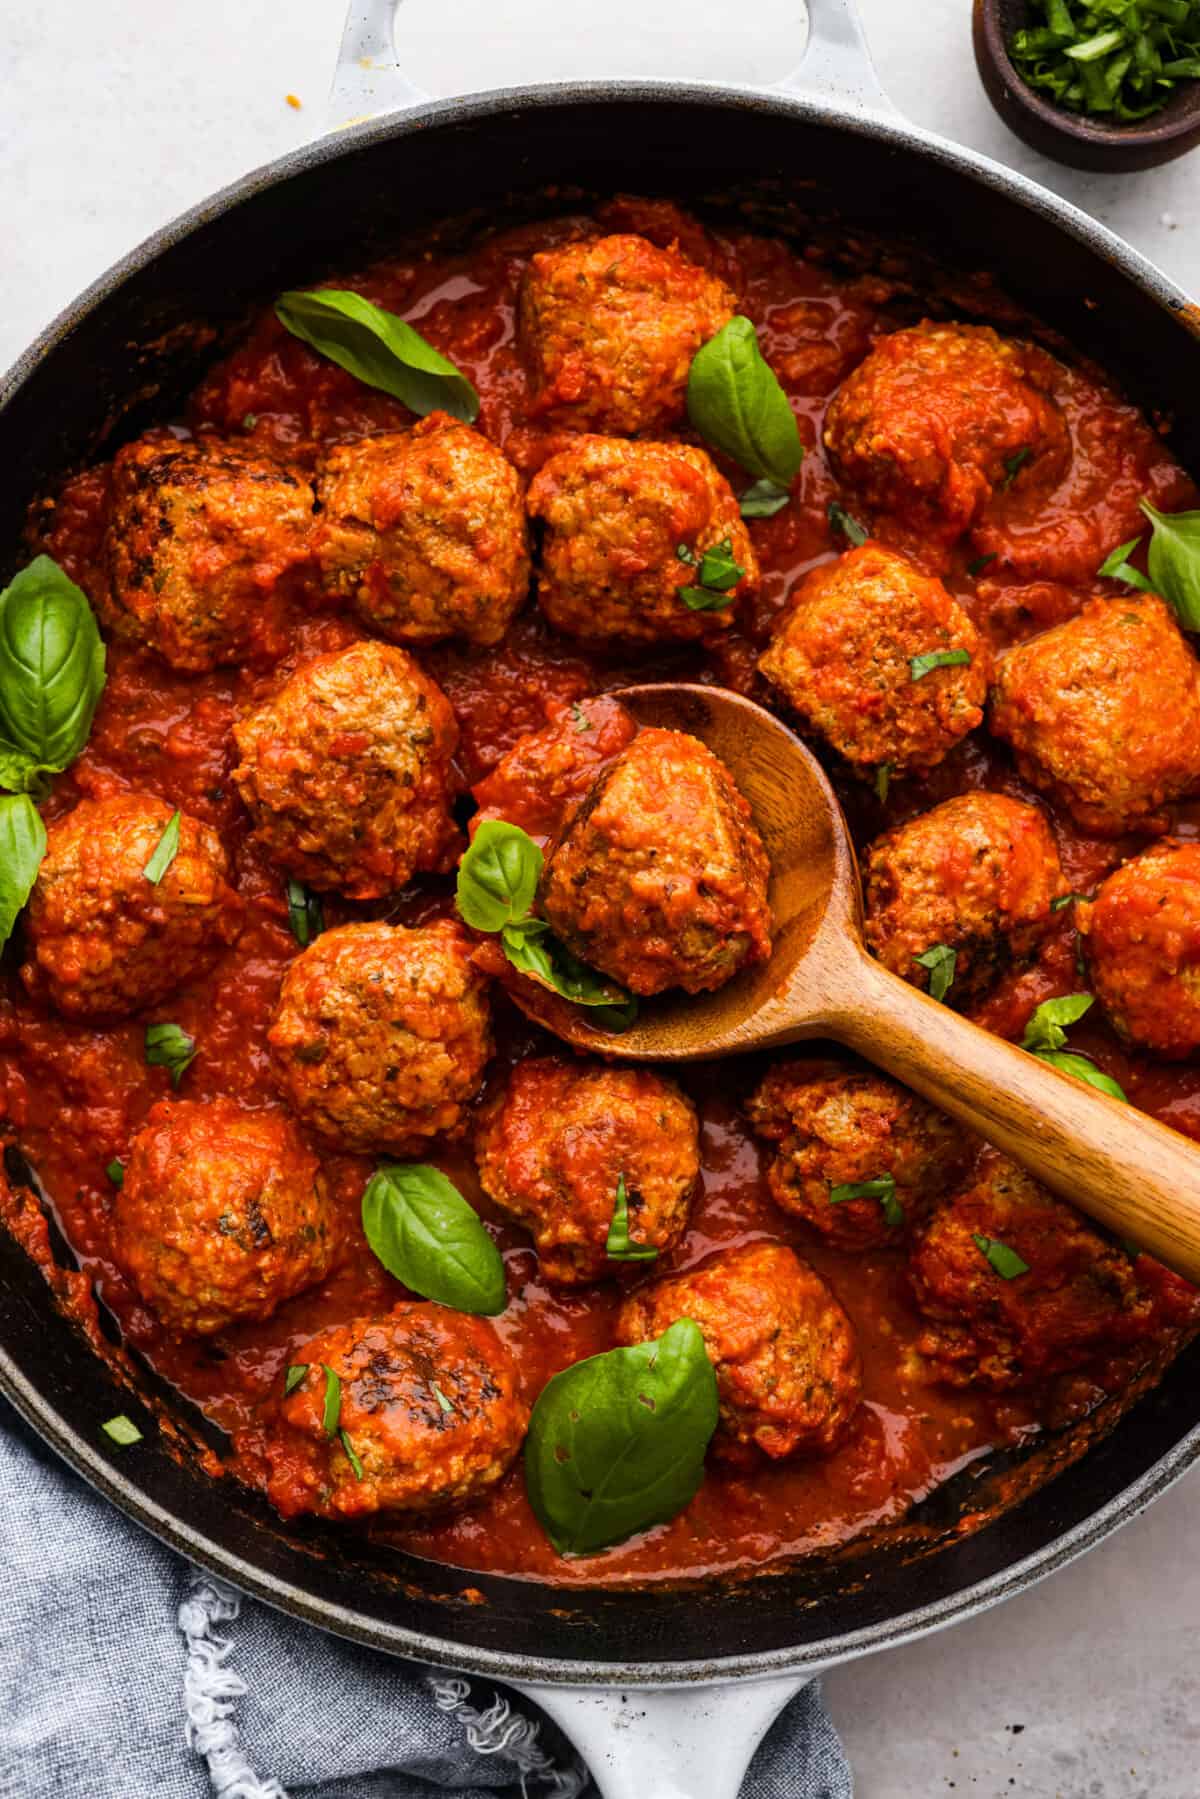 Top view of ricotta meatballs and marinara sauce in a black skillet. A wooden spoon is lifting up a meatball.